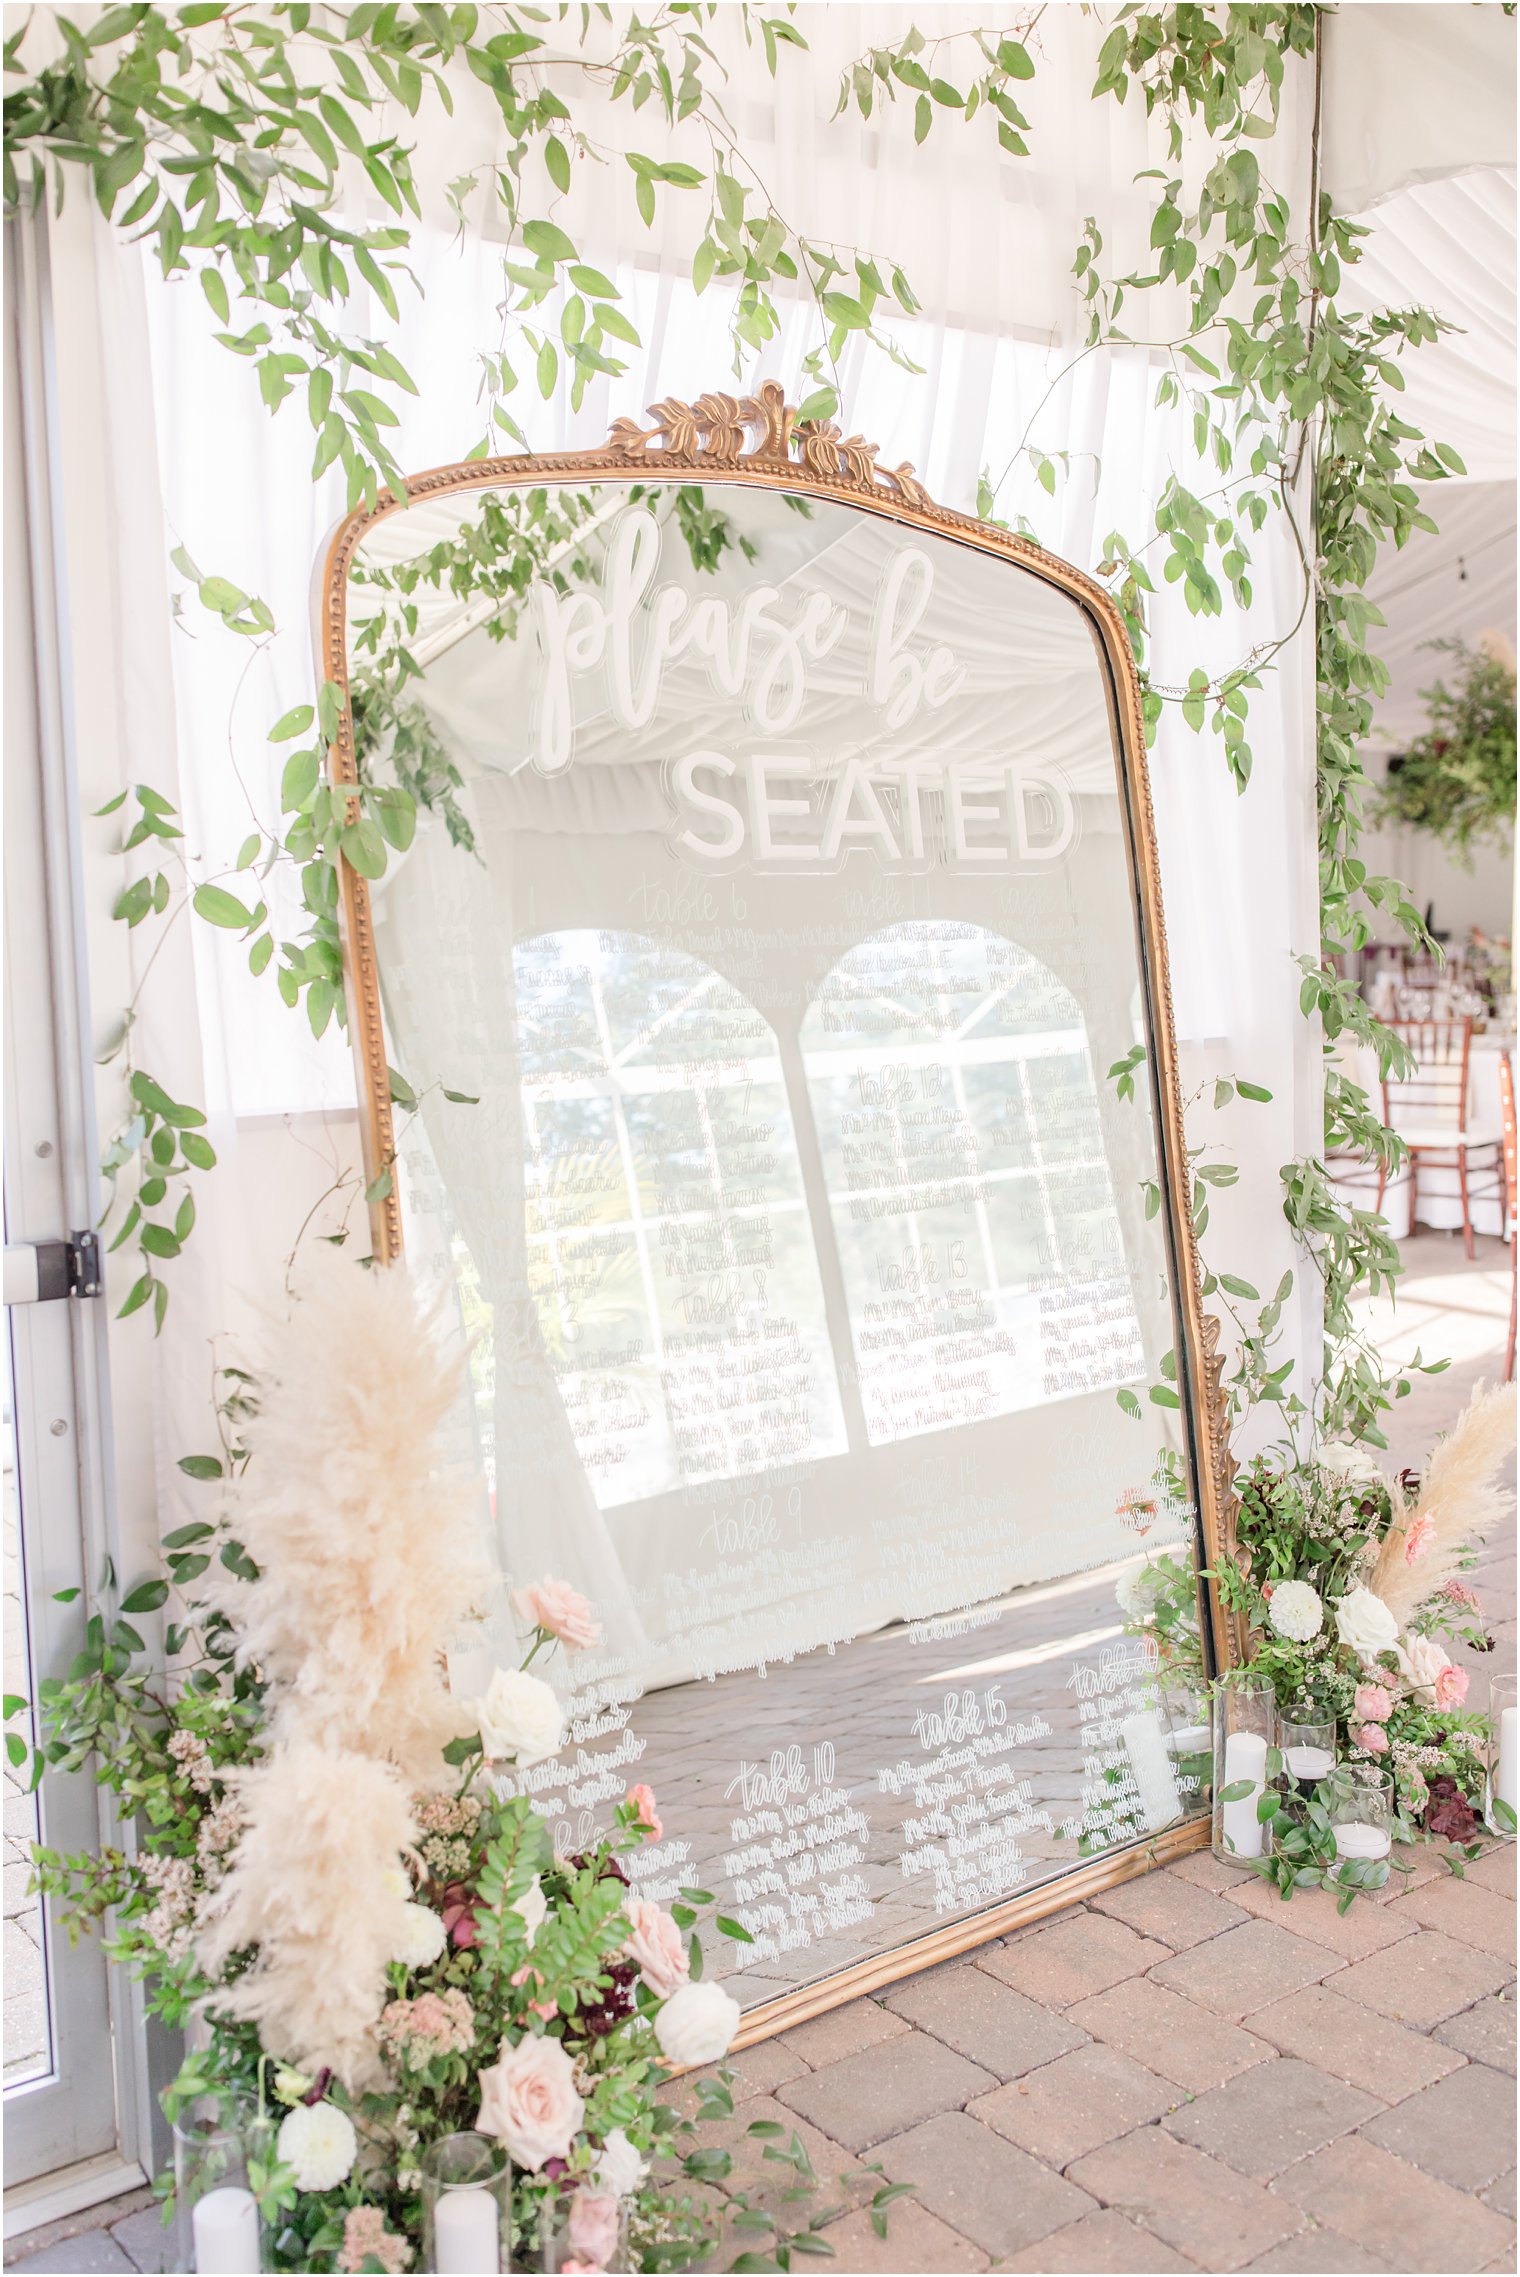 mirrored seating chart by Magnolia Events